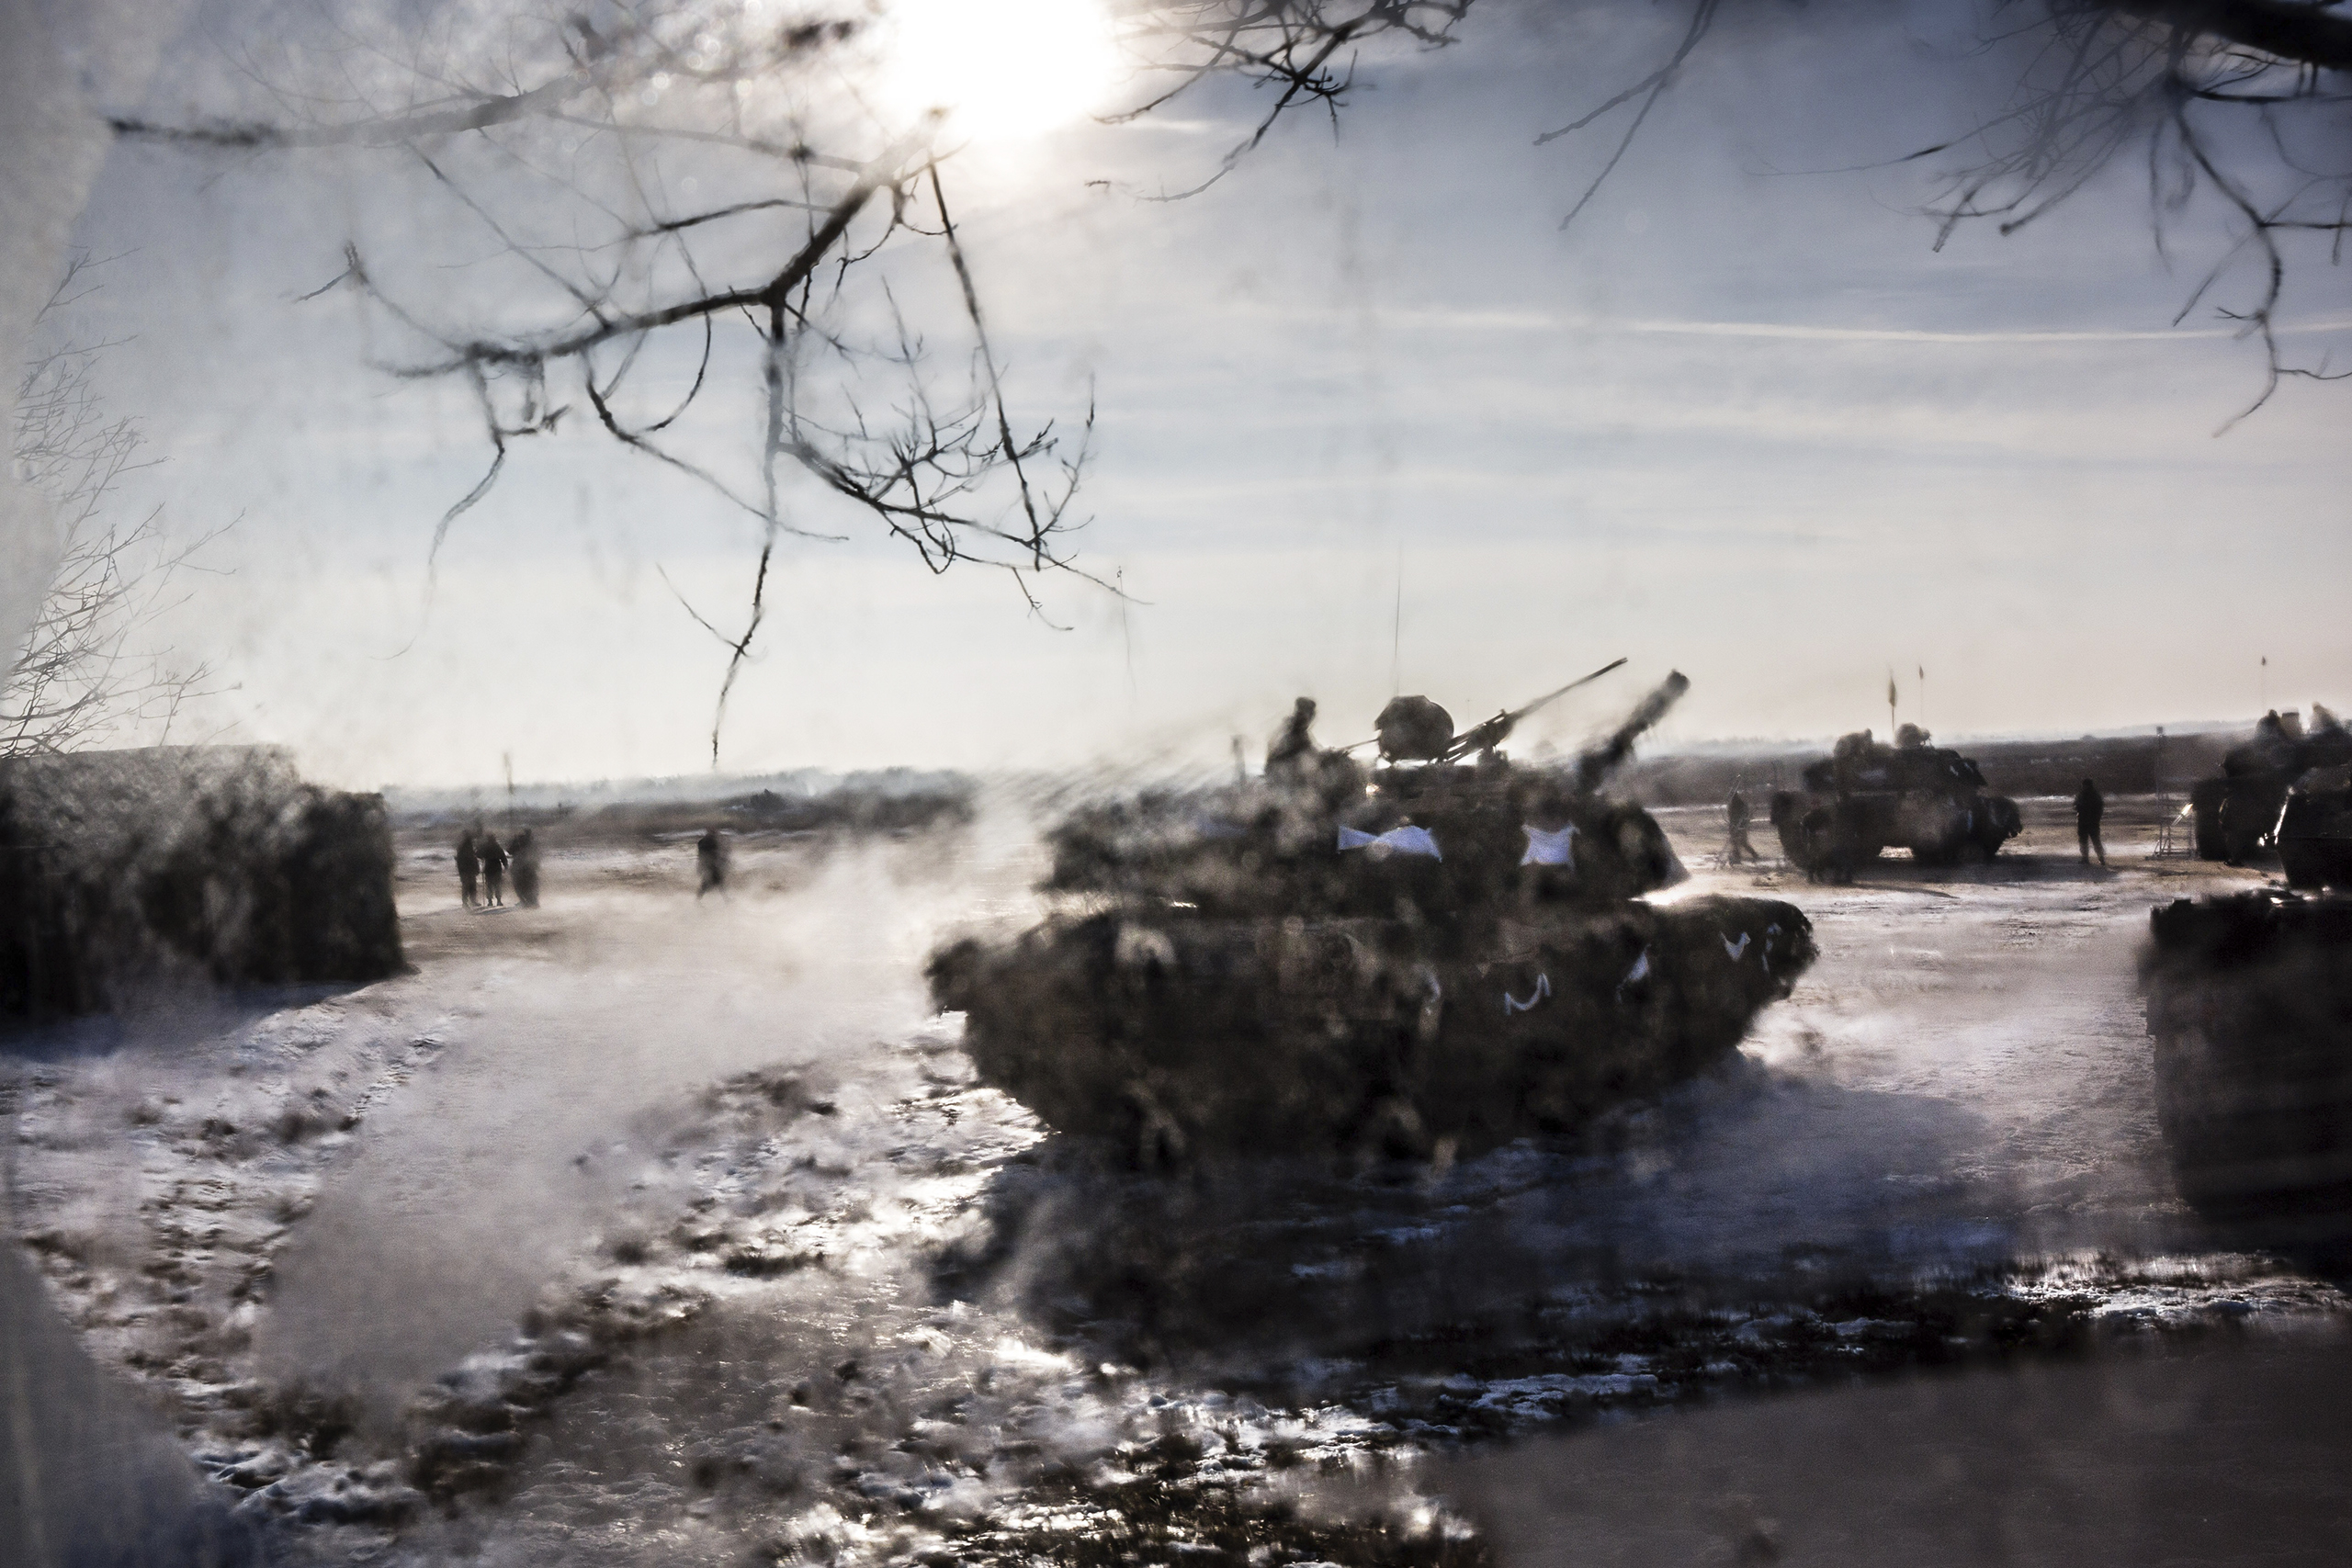 Tanks and troops from the U.S. 3rd Armored Brigade deploy to Poland in January to stand watch against Russia. (Timothy Fadek—Redux)